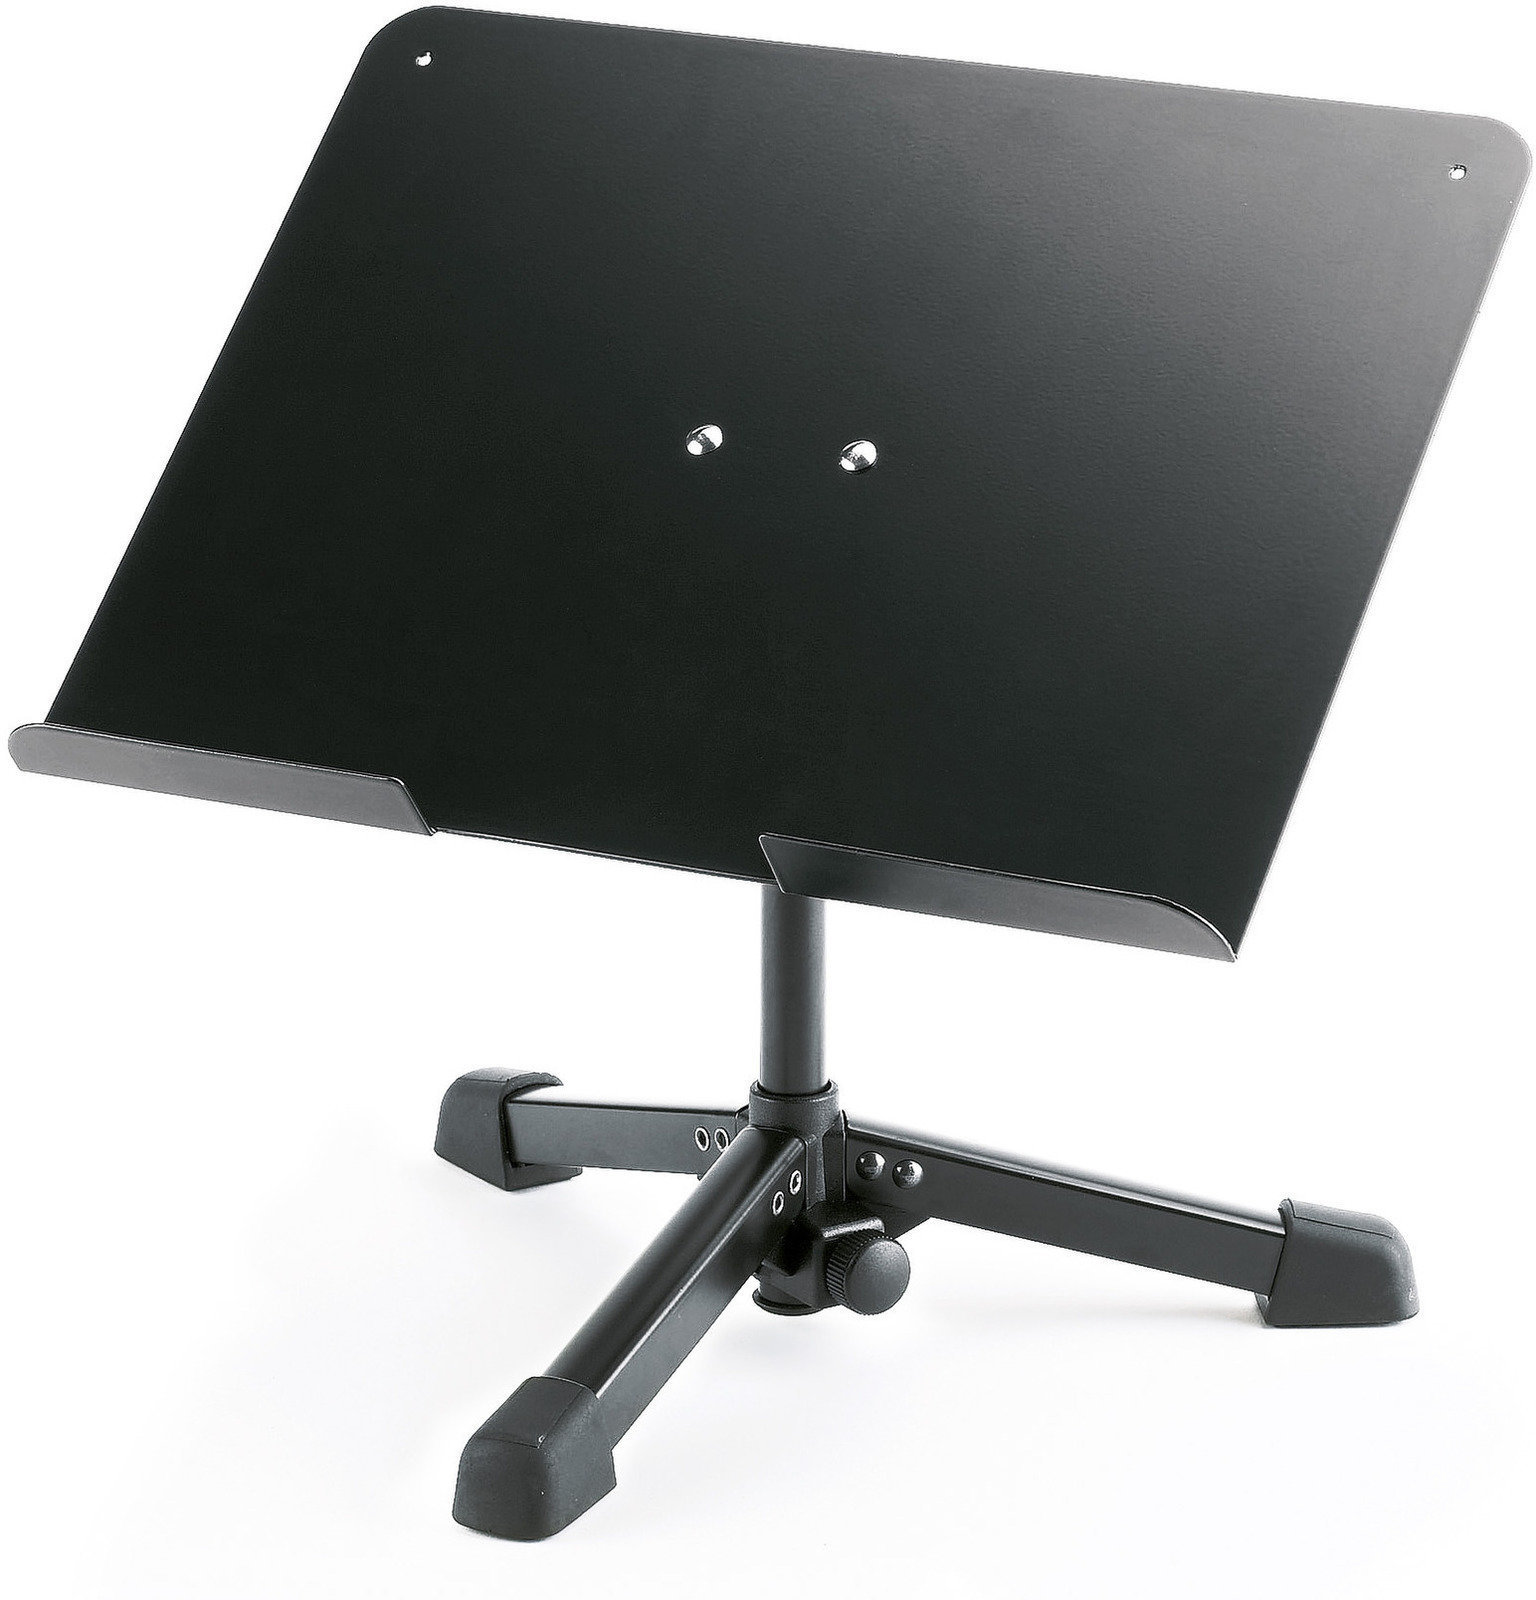 Stand for PC Konig & Meyer Universal Tabletop Stand Black